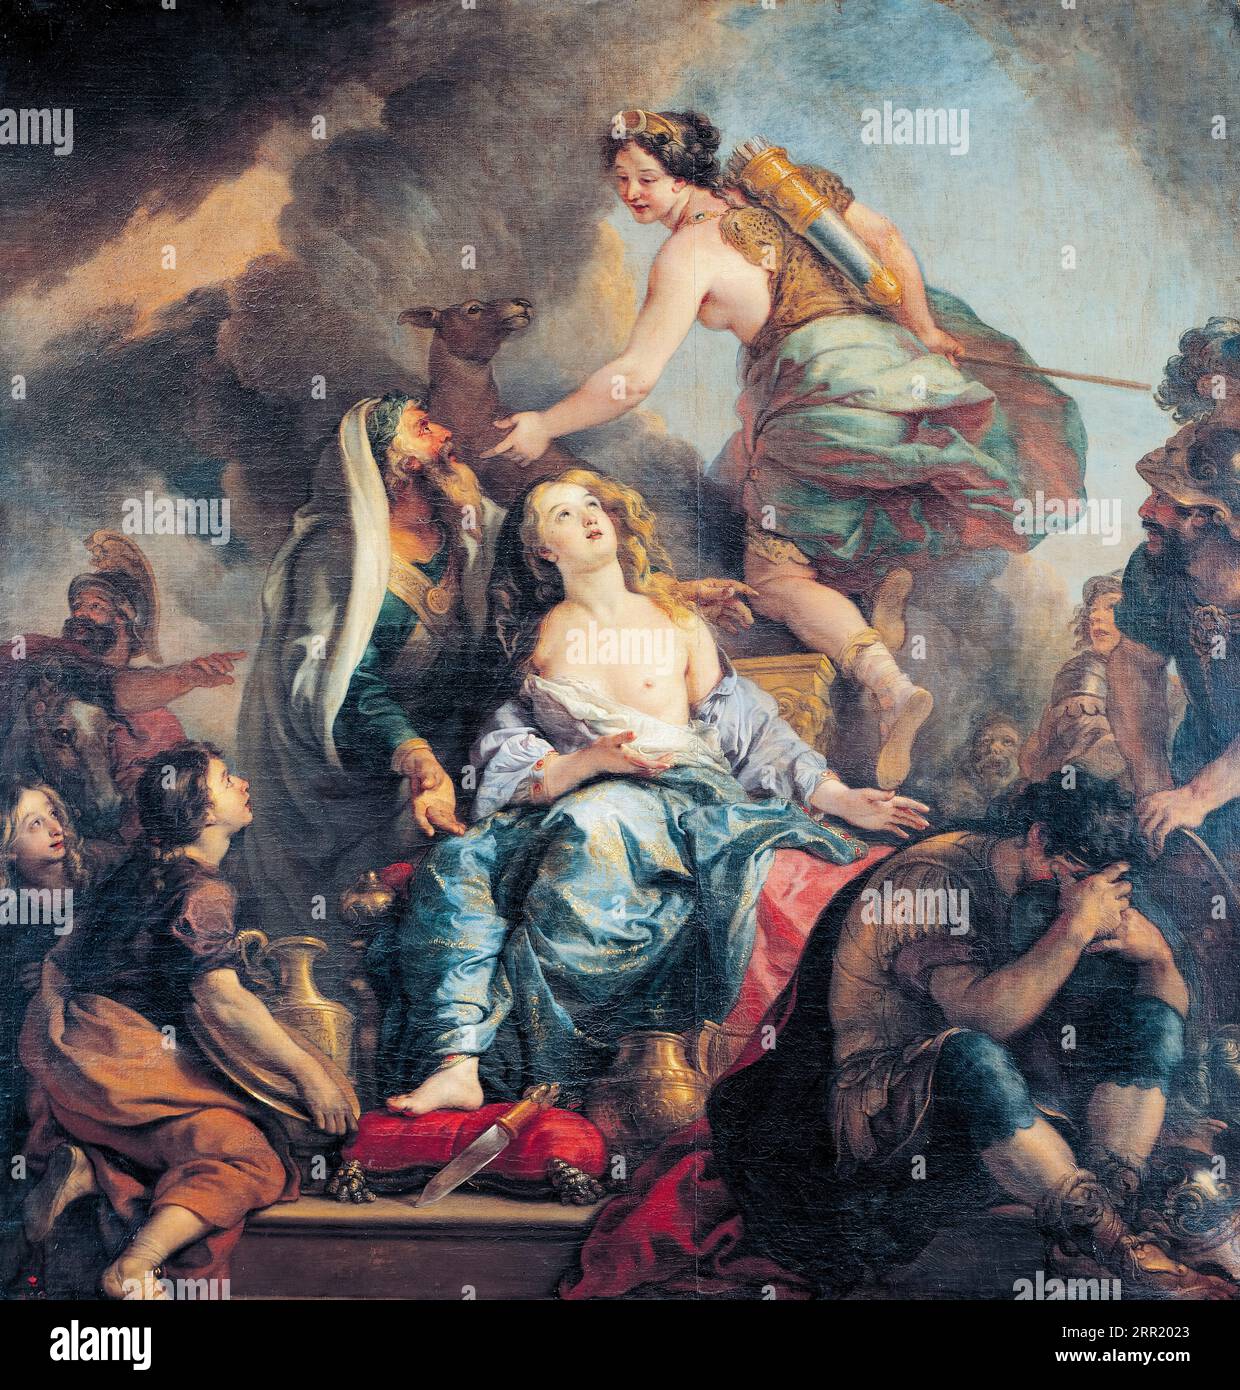 Charles de La Fosse, The Sacrifice of Iphigenia, painting in oil on canvas, 1680 Stock Photo